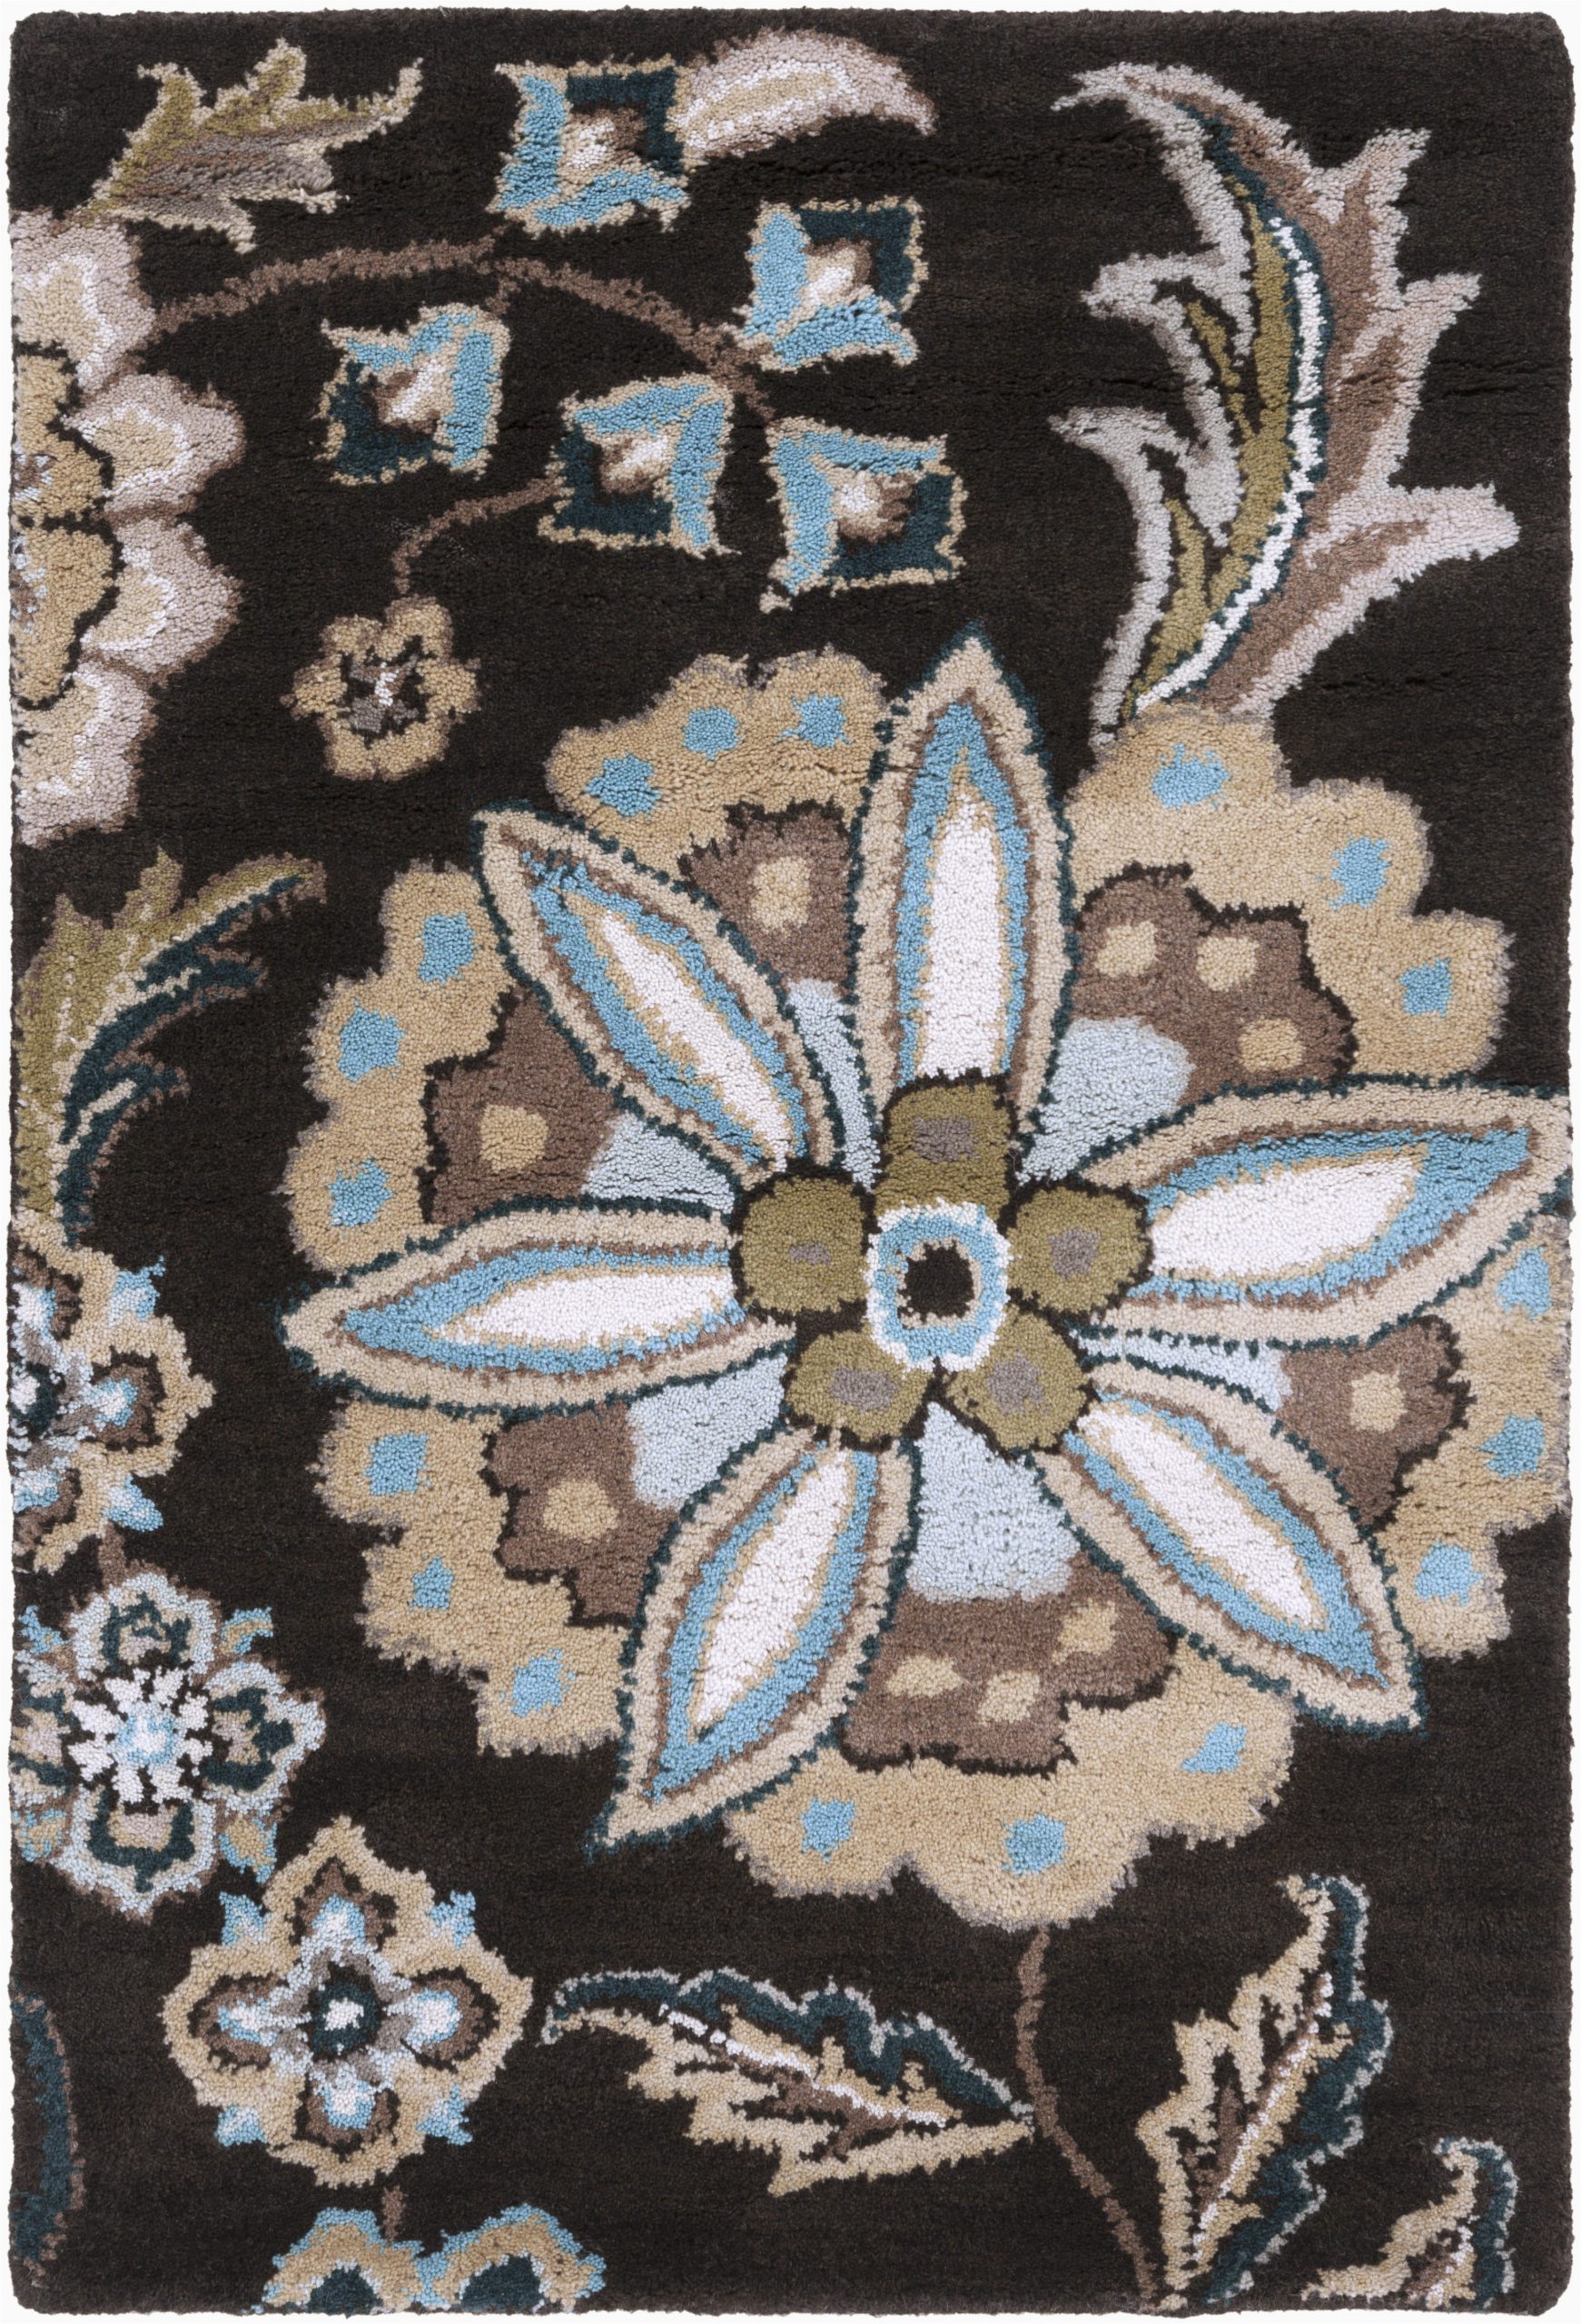 Athena Garden Floral area Rugs Details About Surya ath 5061 athena Transitional Floral Square Ebony 4 Square area Rug